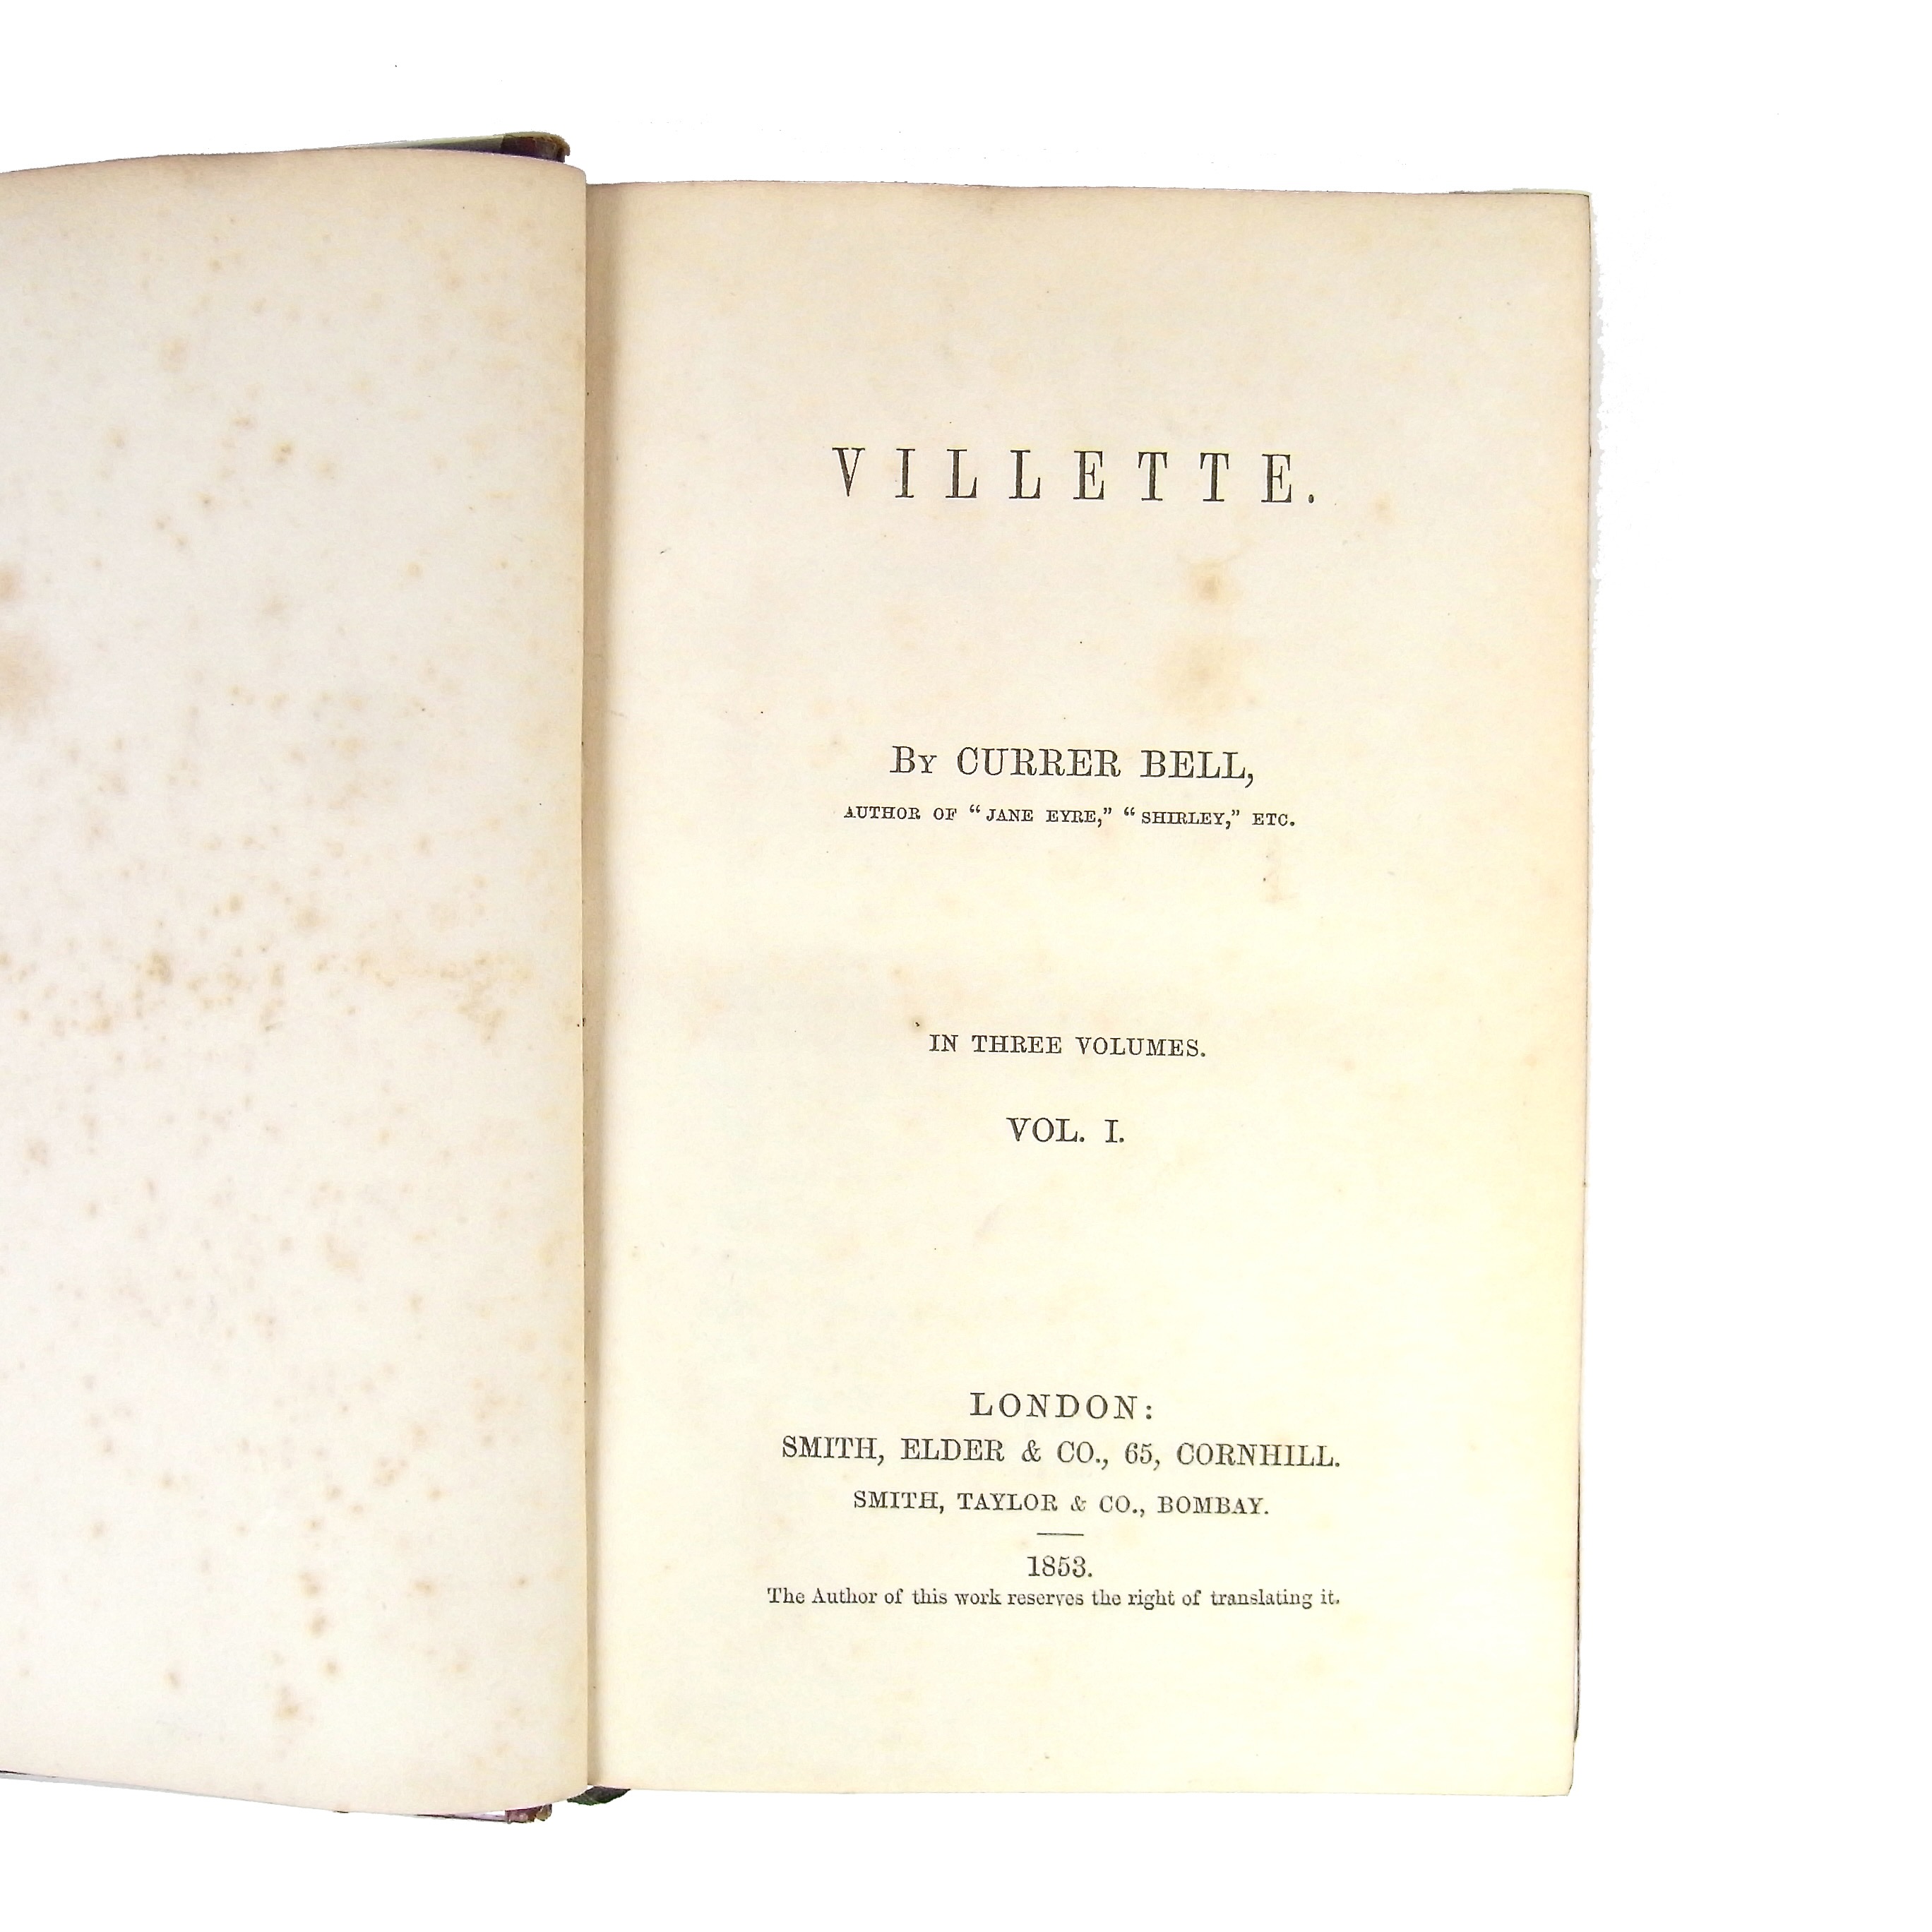 Books: Charlotte Bronte as Currer Bell - Villette, dated 1853 - Image 2 of 2